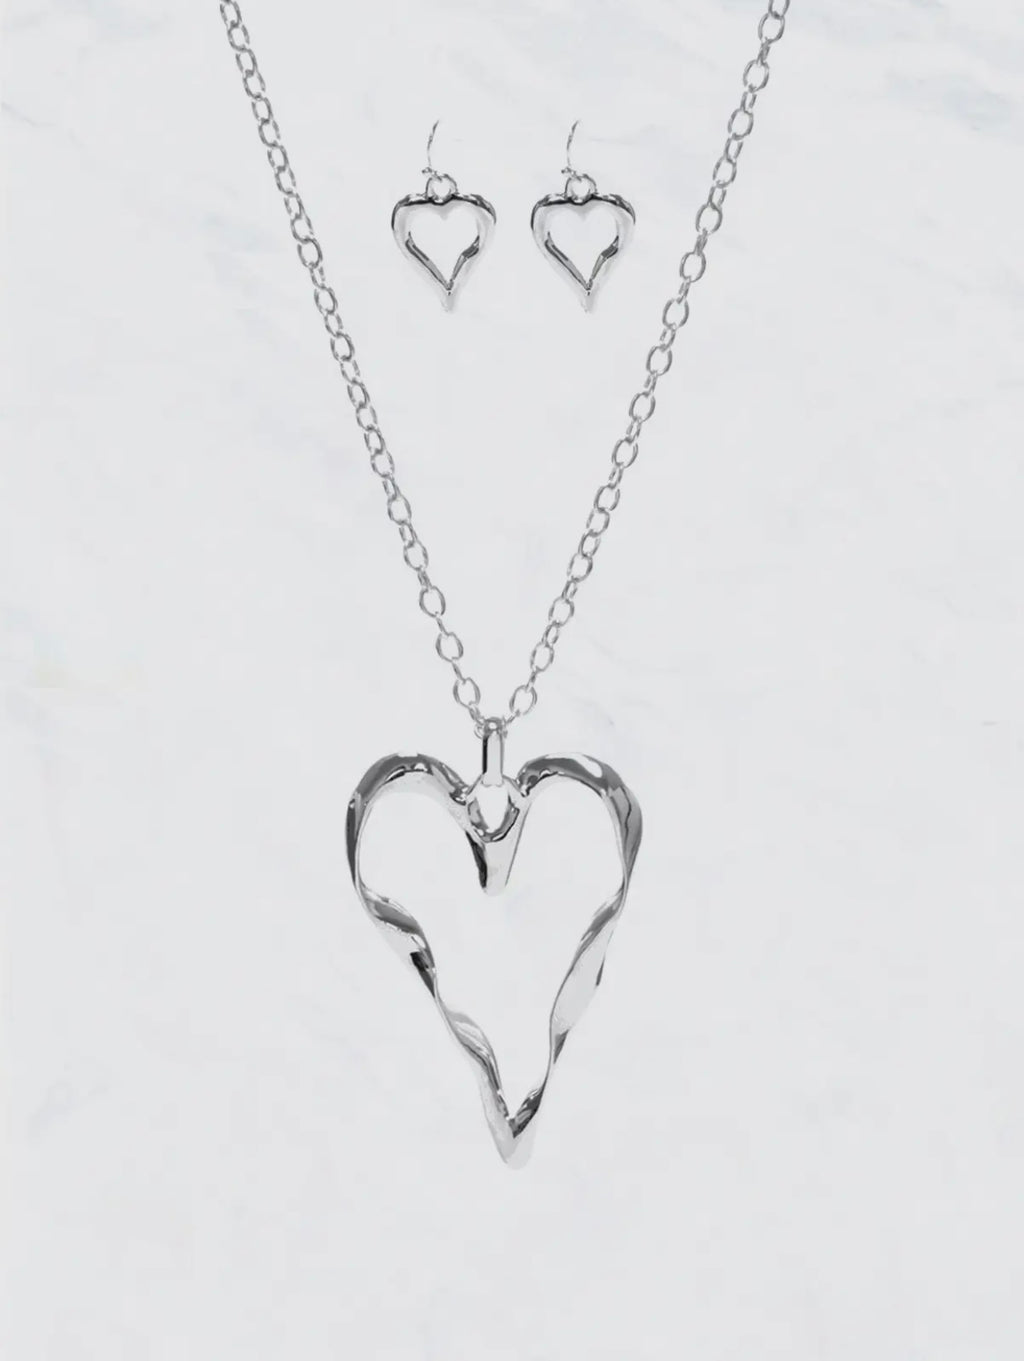 So Much Love Silver Heart Necklace Set